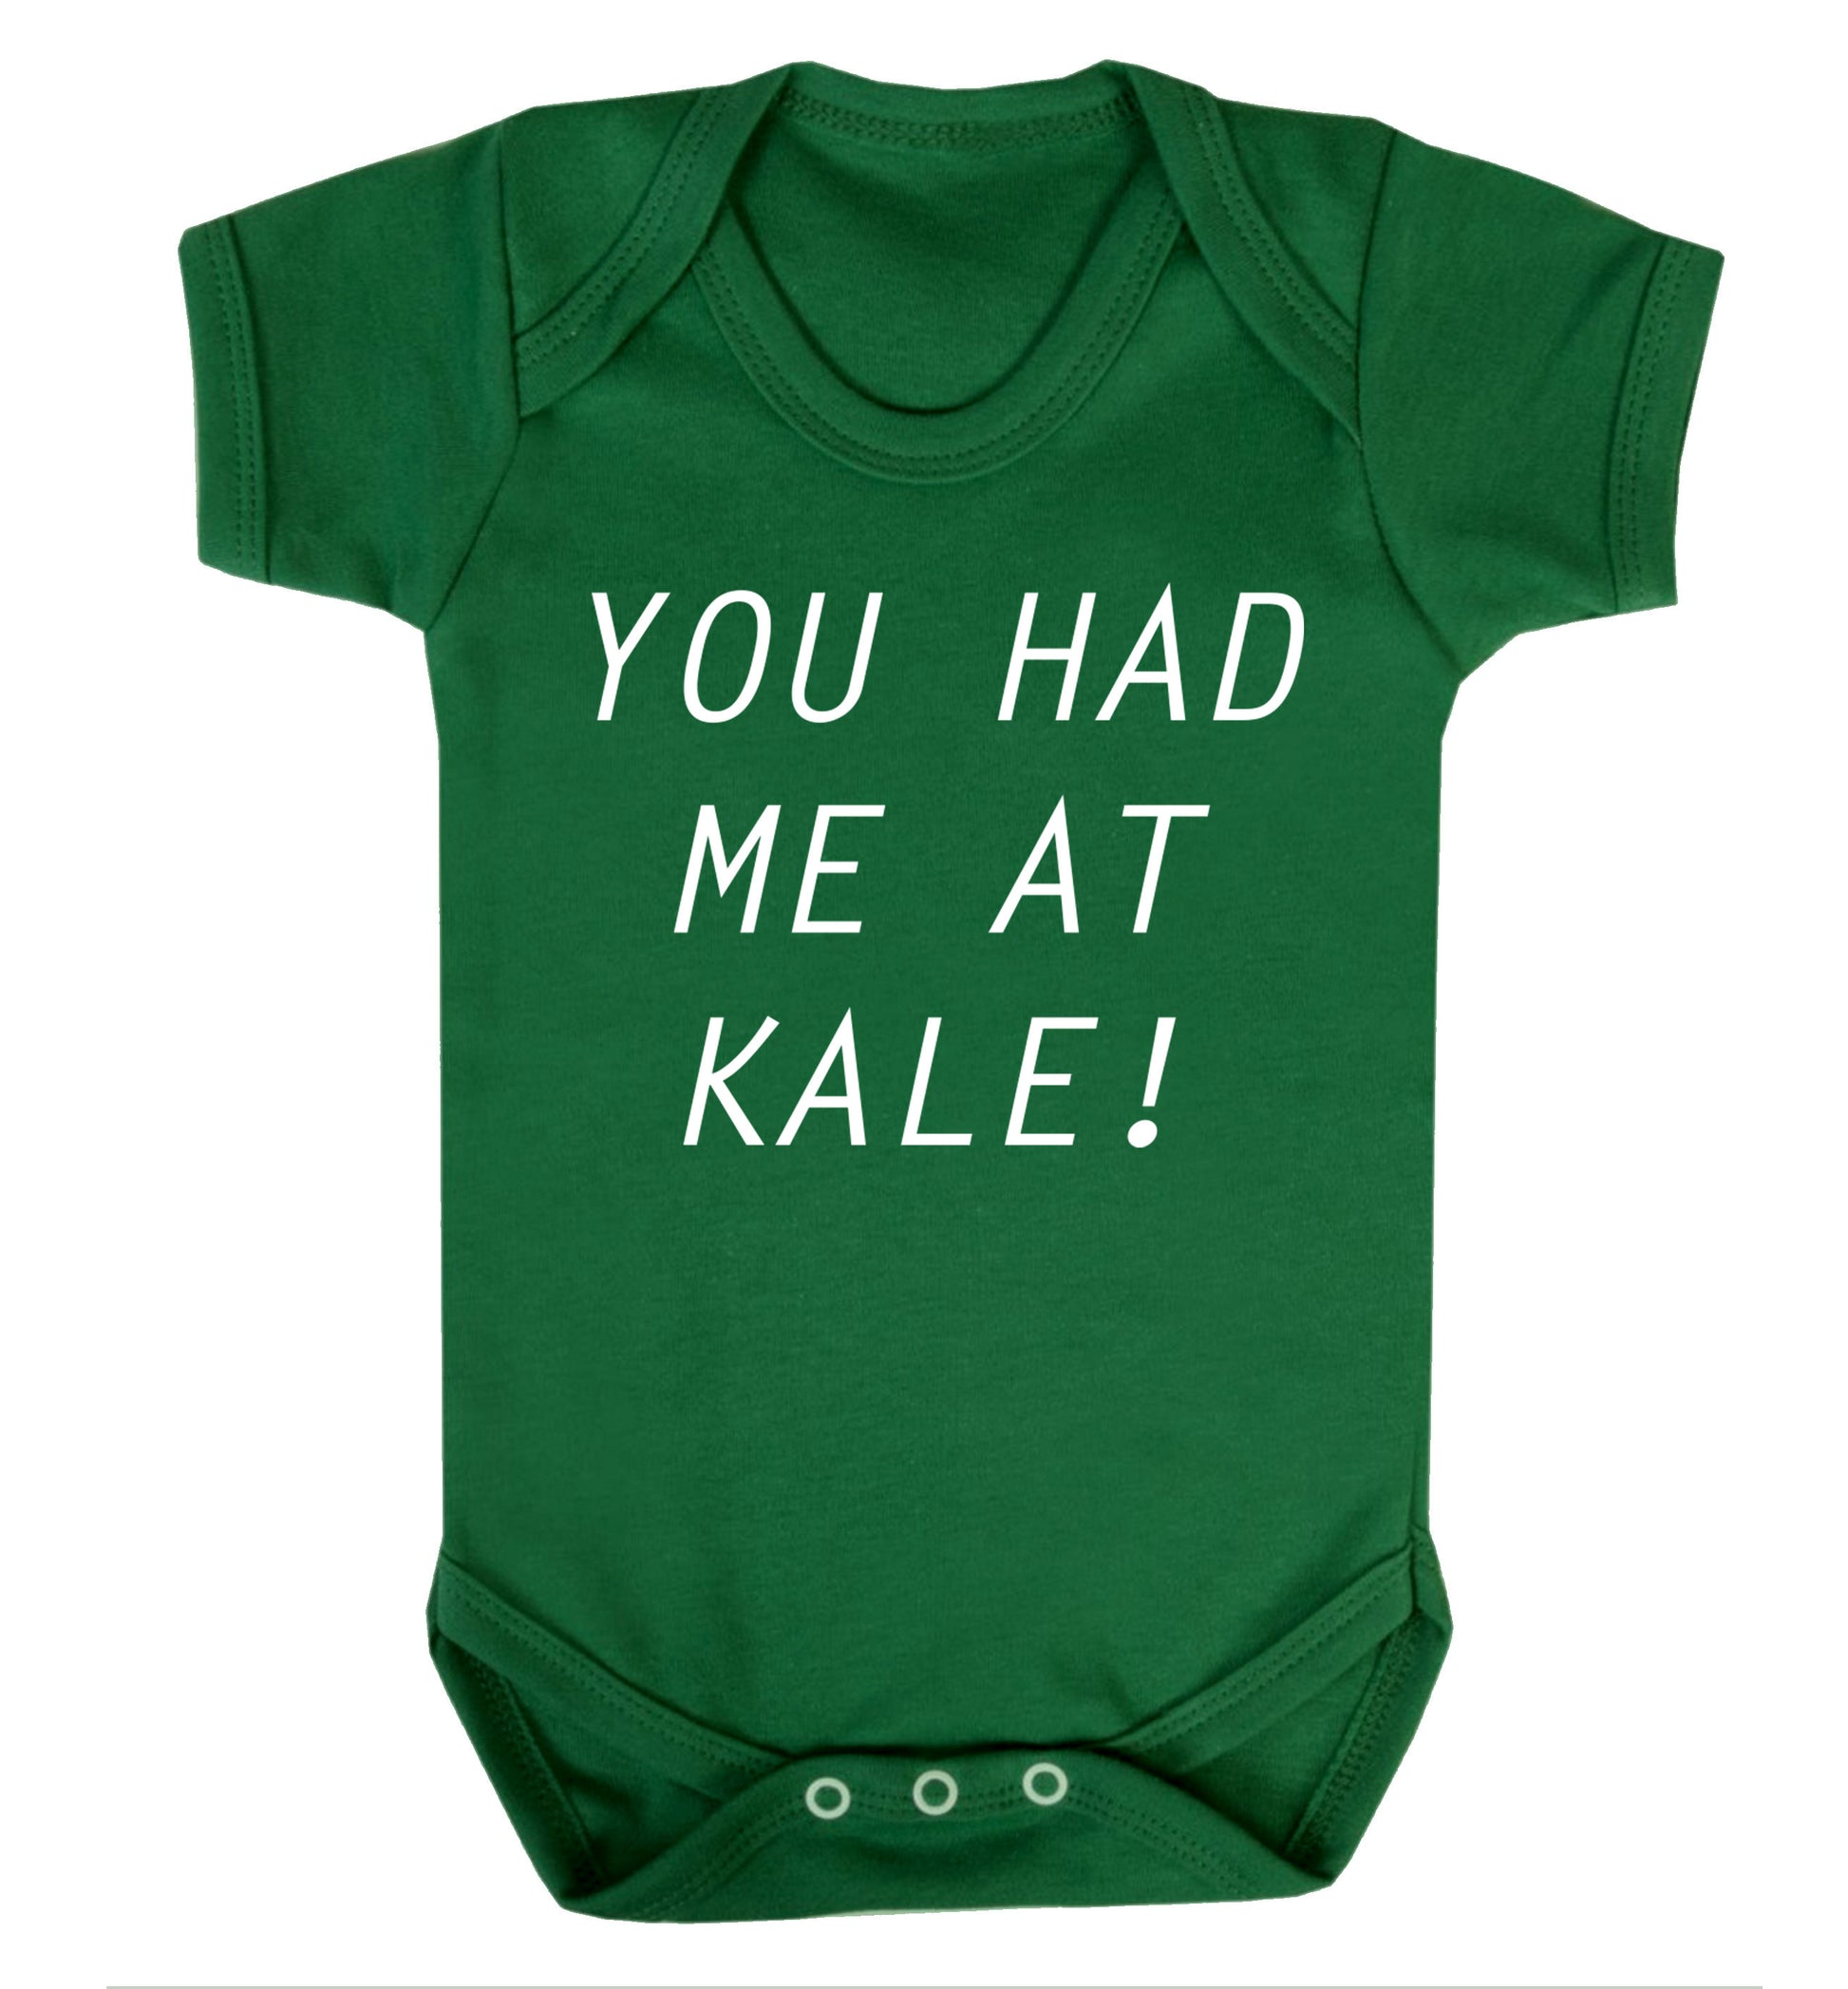 You had me at kale Baby Vest green 18-24 months